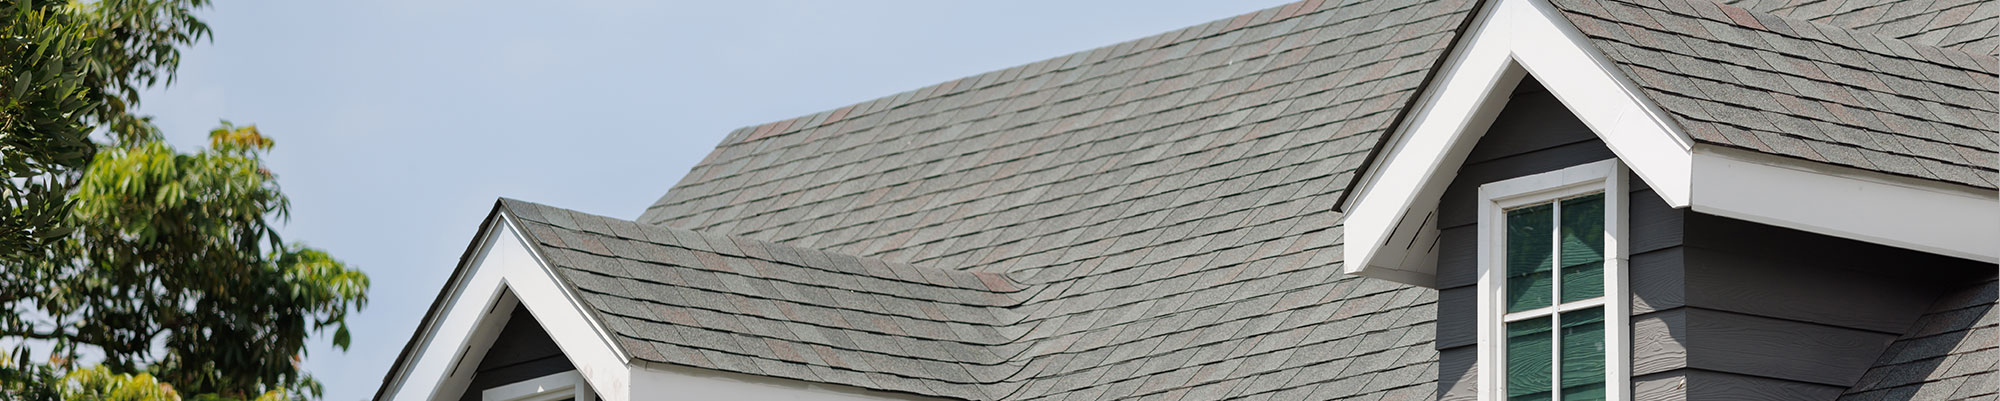 Cudahy roof replacement company